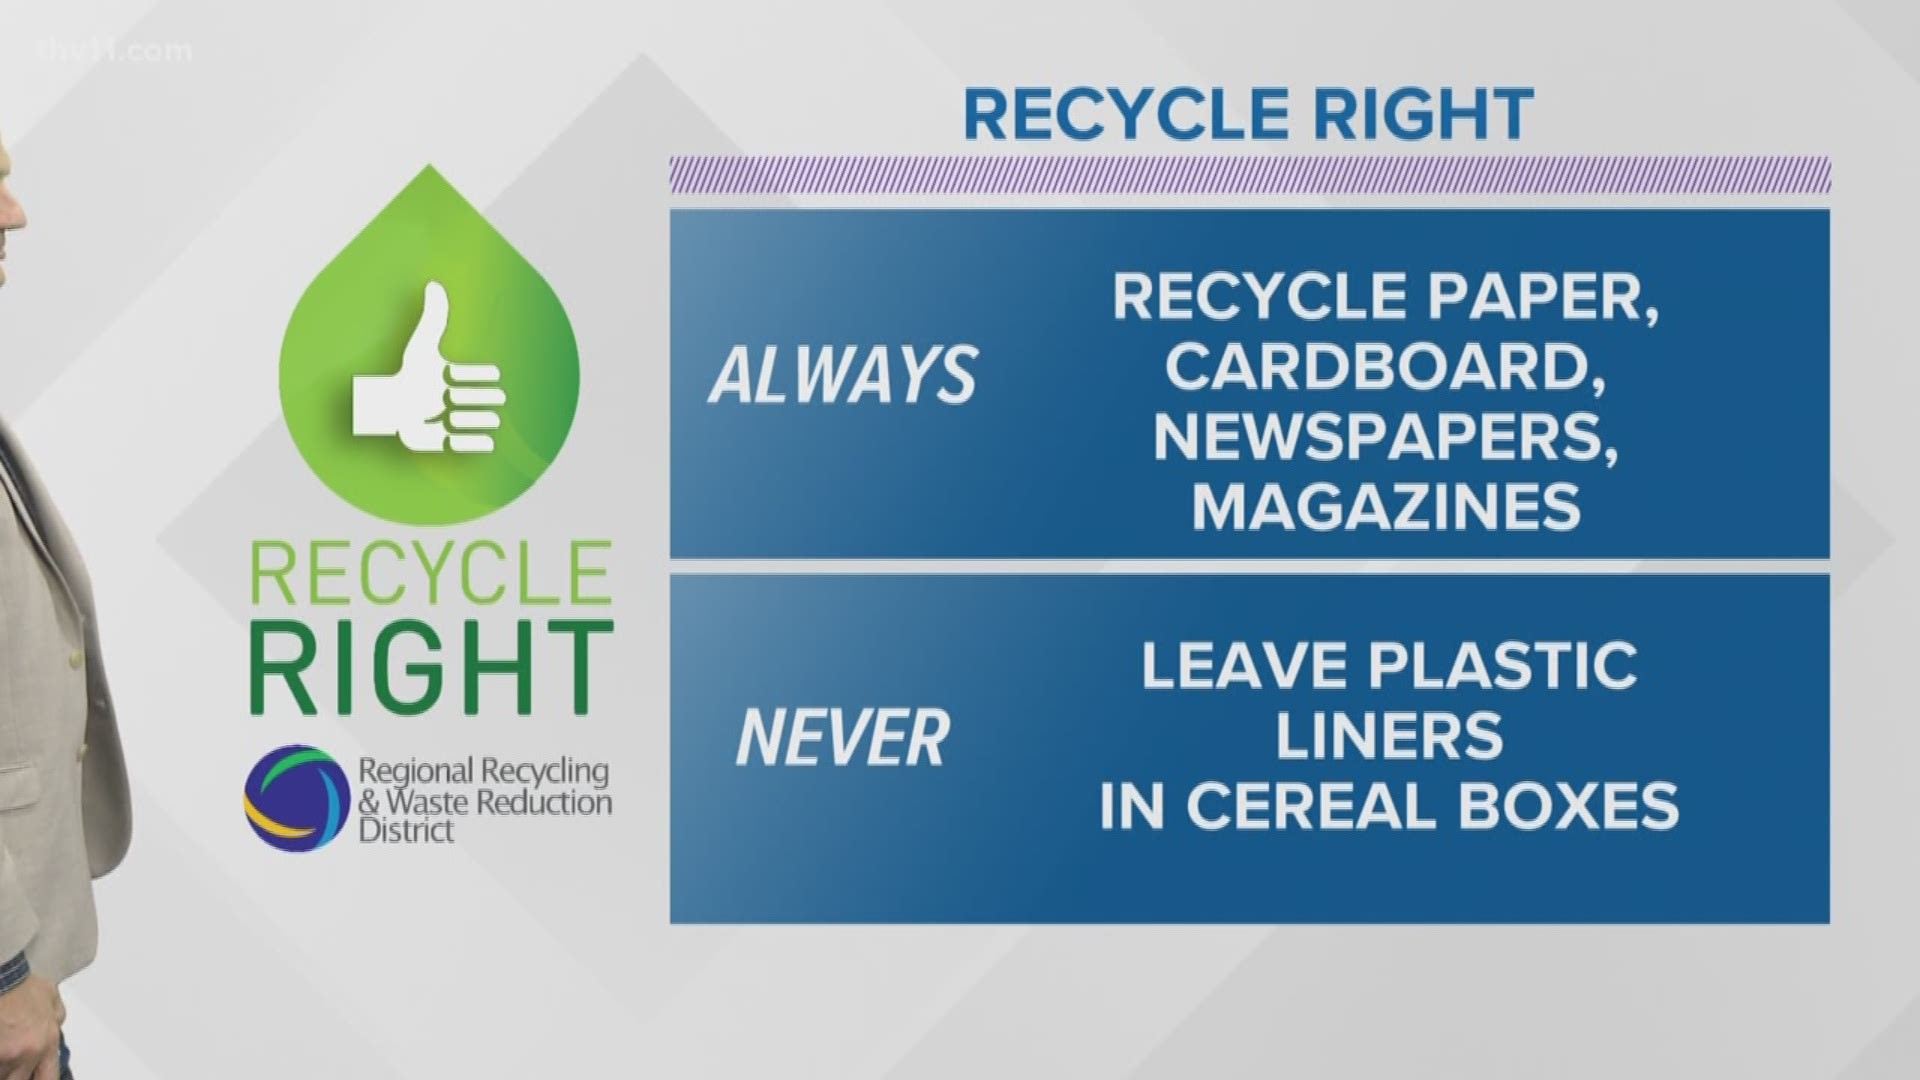 Chief Meteorologist Ed Buckner has your Recycle Right tip of the week for week seven.